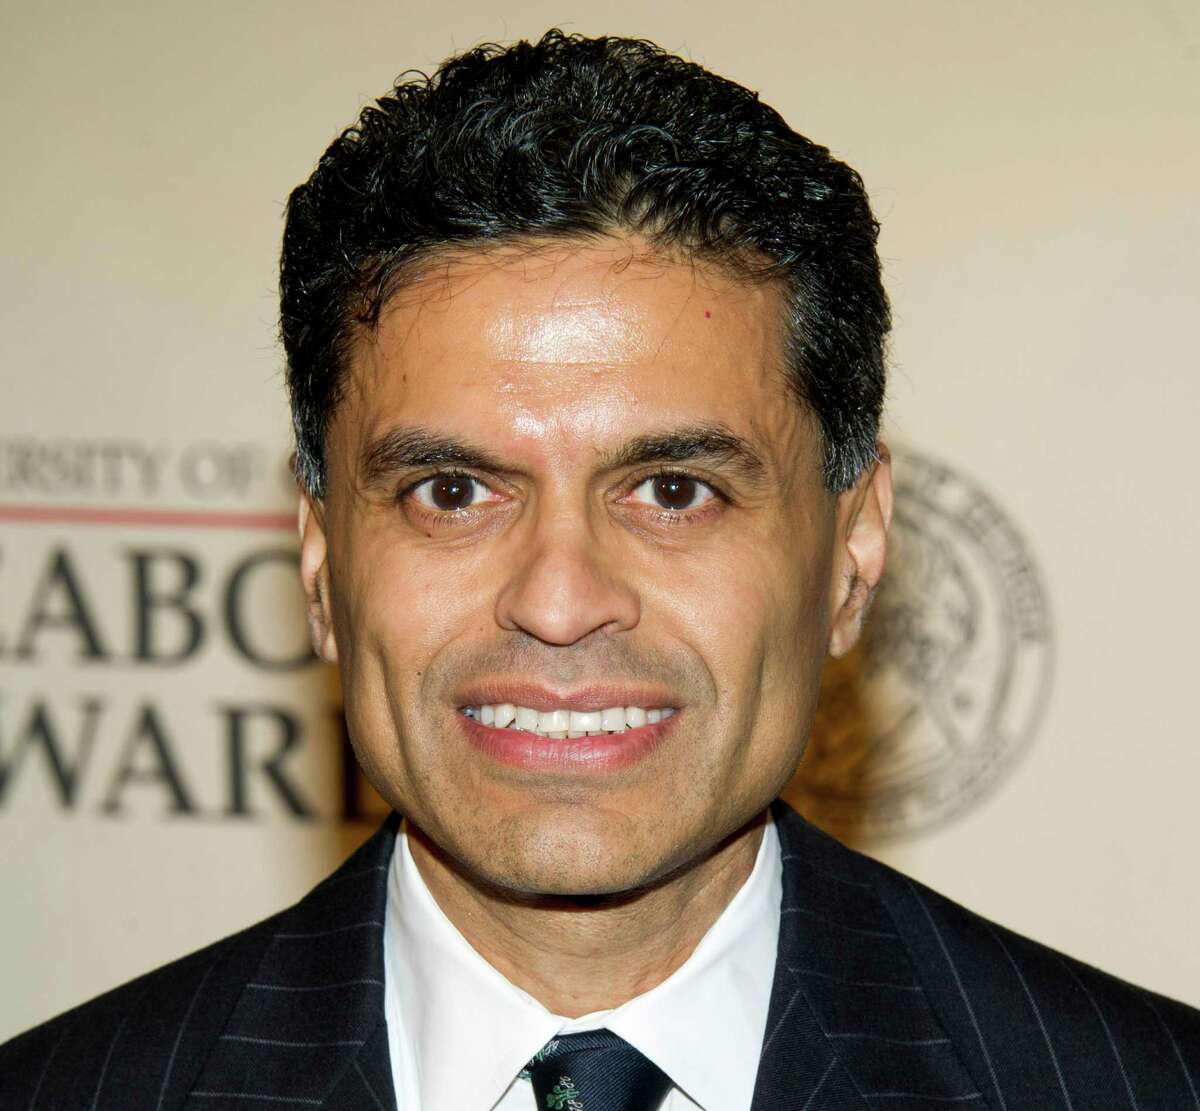 FILE - This May 21, 2012 file photo shows columnist and TV host Fareed Zakaria attending the 71st Annual Peabody Awards in New York. Zakaria is apologizing for lifting paragraphs by another writer for use in his column in Time magazine. Zakaria said in a statement Friday, Aug. 10, he made a "terrible mistake" and termed it "entirely my fault." Time magazine said it has suspended his column for one month pending further review. Media reporters had cited similarities between passages in Zakaria's column about gun control that appeared in Time's Aug. 20 issue, and paragraphs from an article by Harvard University history professor Jill Lepore published in April in The New Yorker magazine. (AP Photo/Charles Sykes, file)